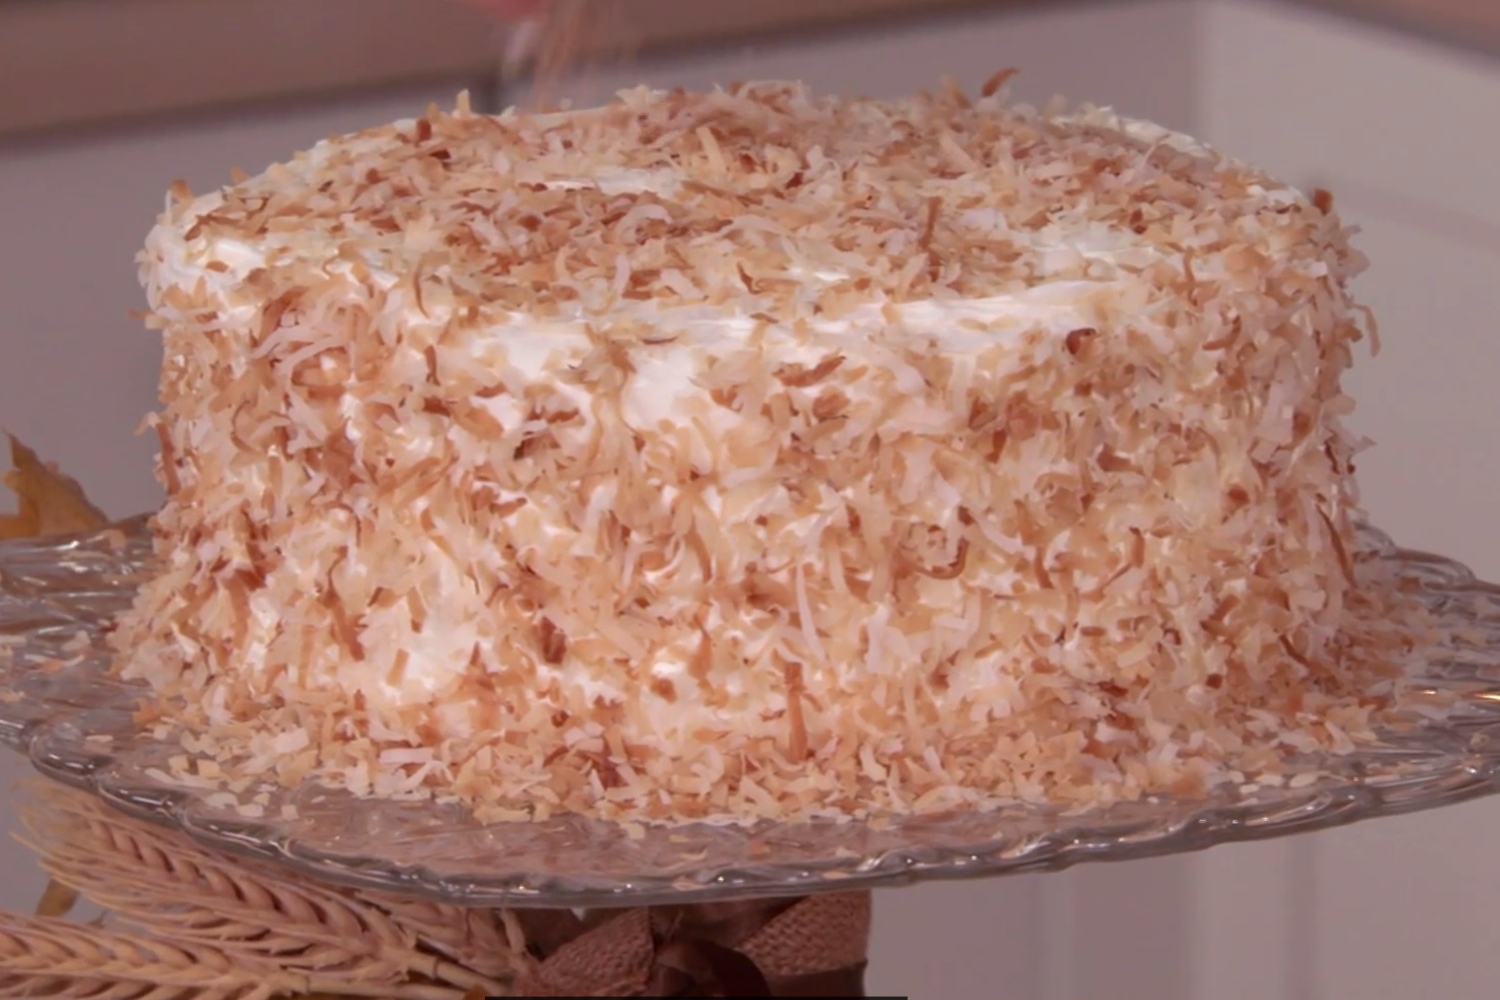 A white-frosted cake coated in toasted coconut flakes